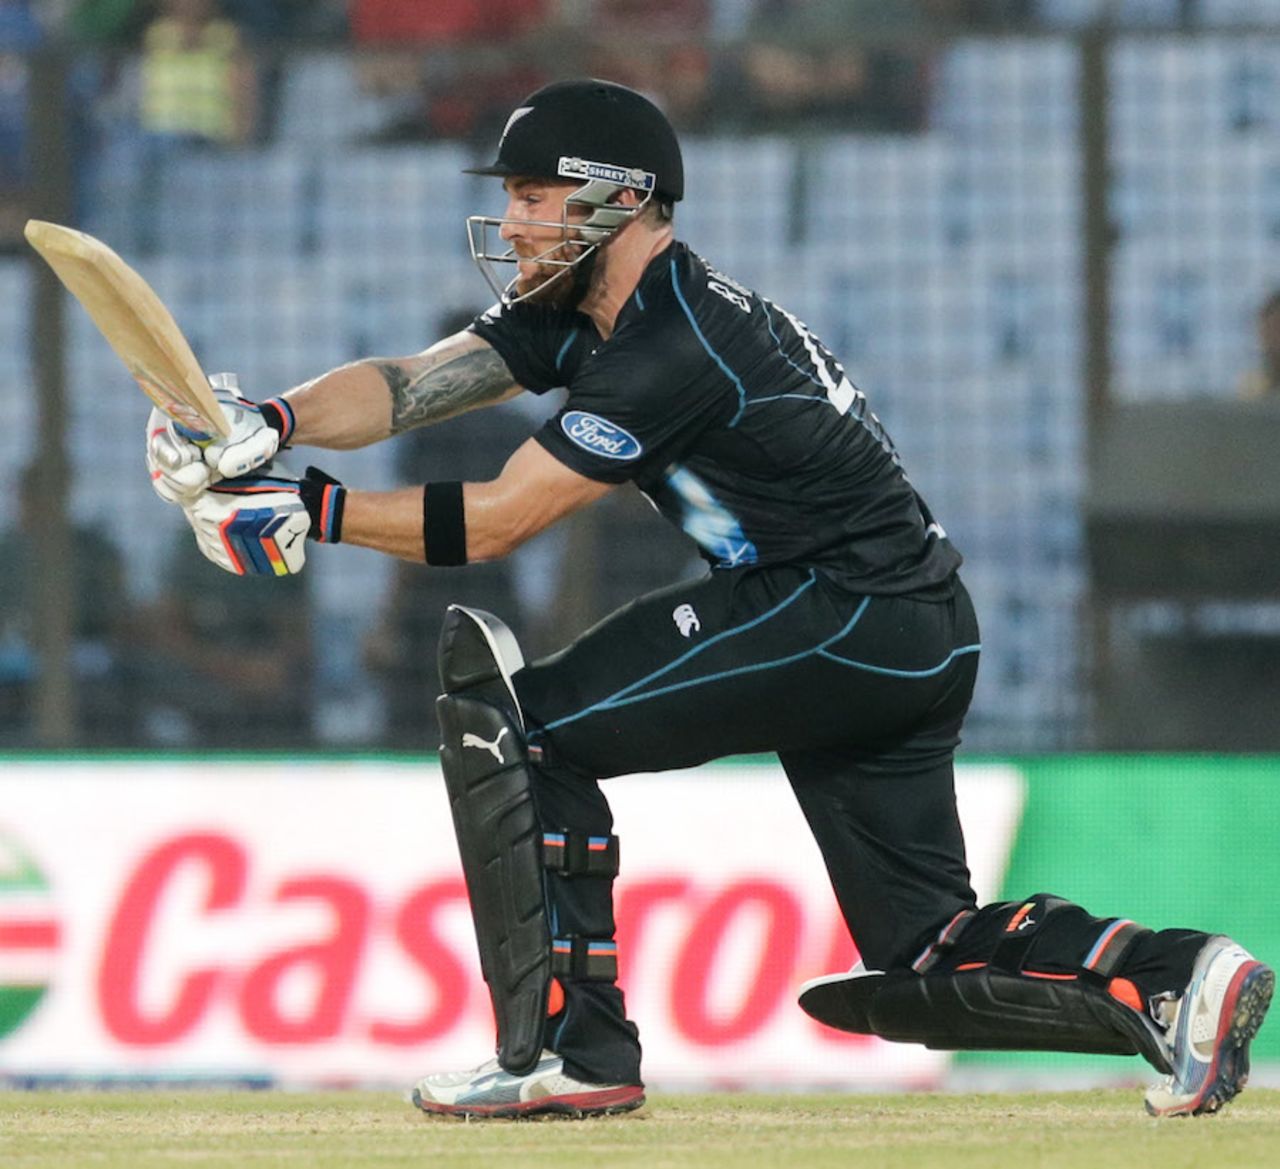 Brendon McCullum became the first batsman to cross 2000 T20I runs during his 65, Netherlands v New Zealand, World T20, Group 1, Chittagong, March 29, 2014